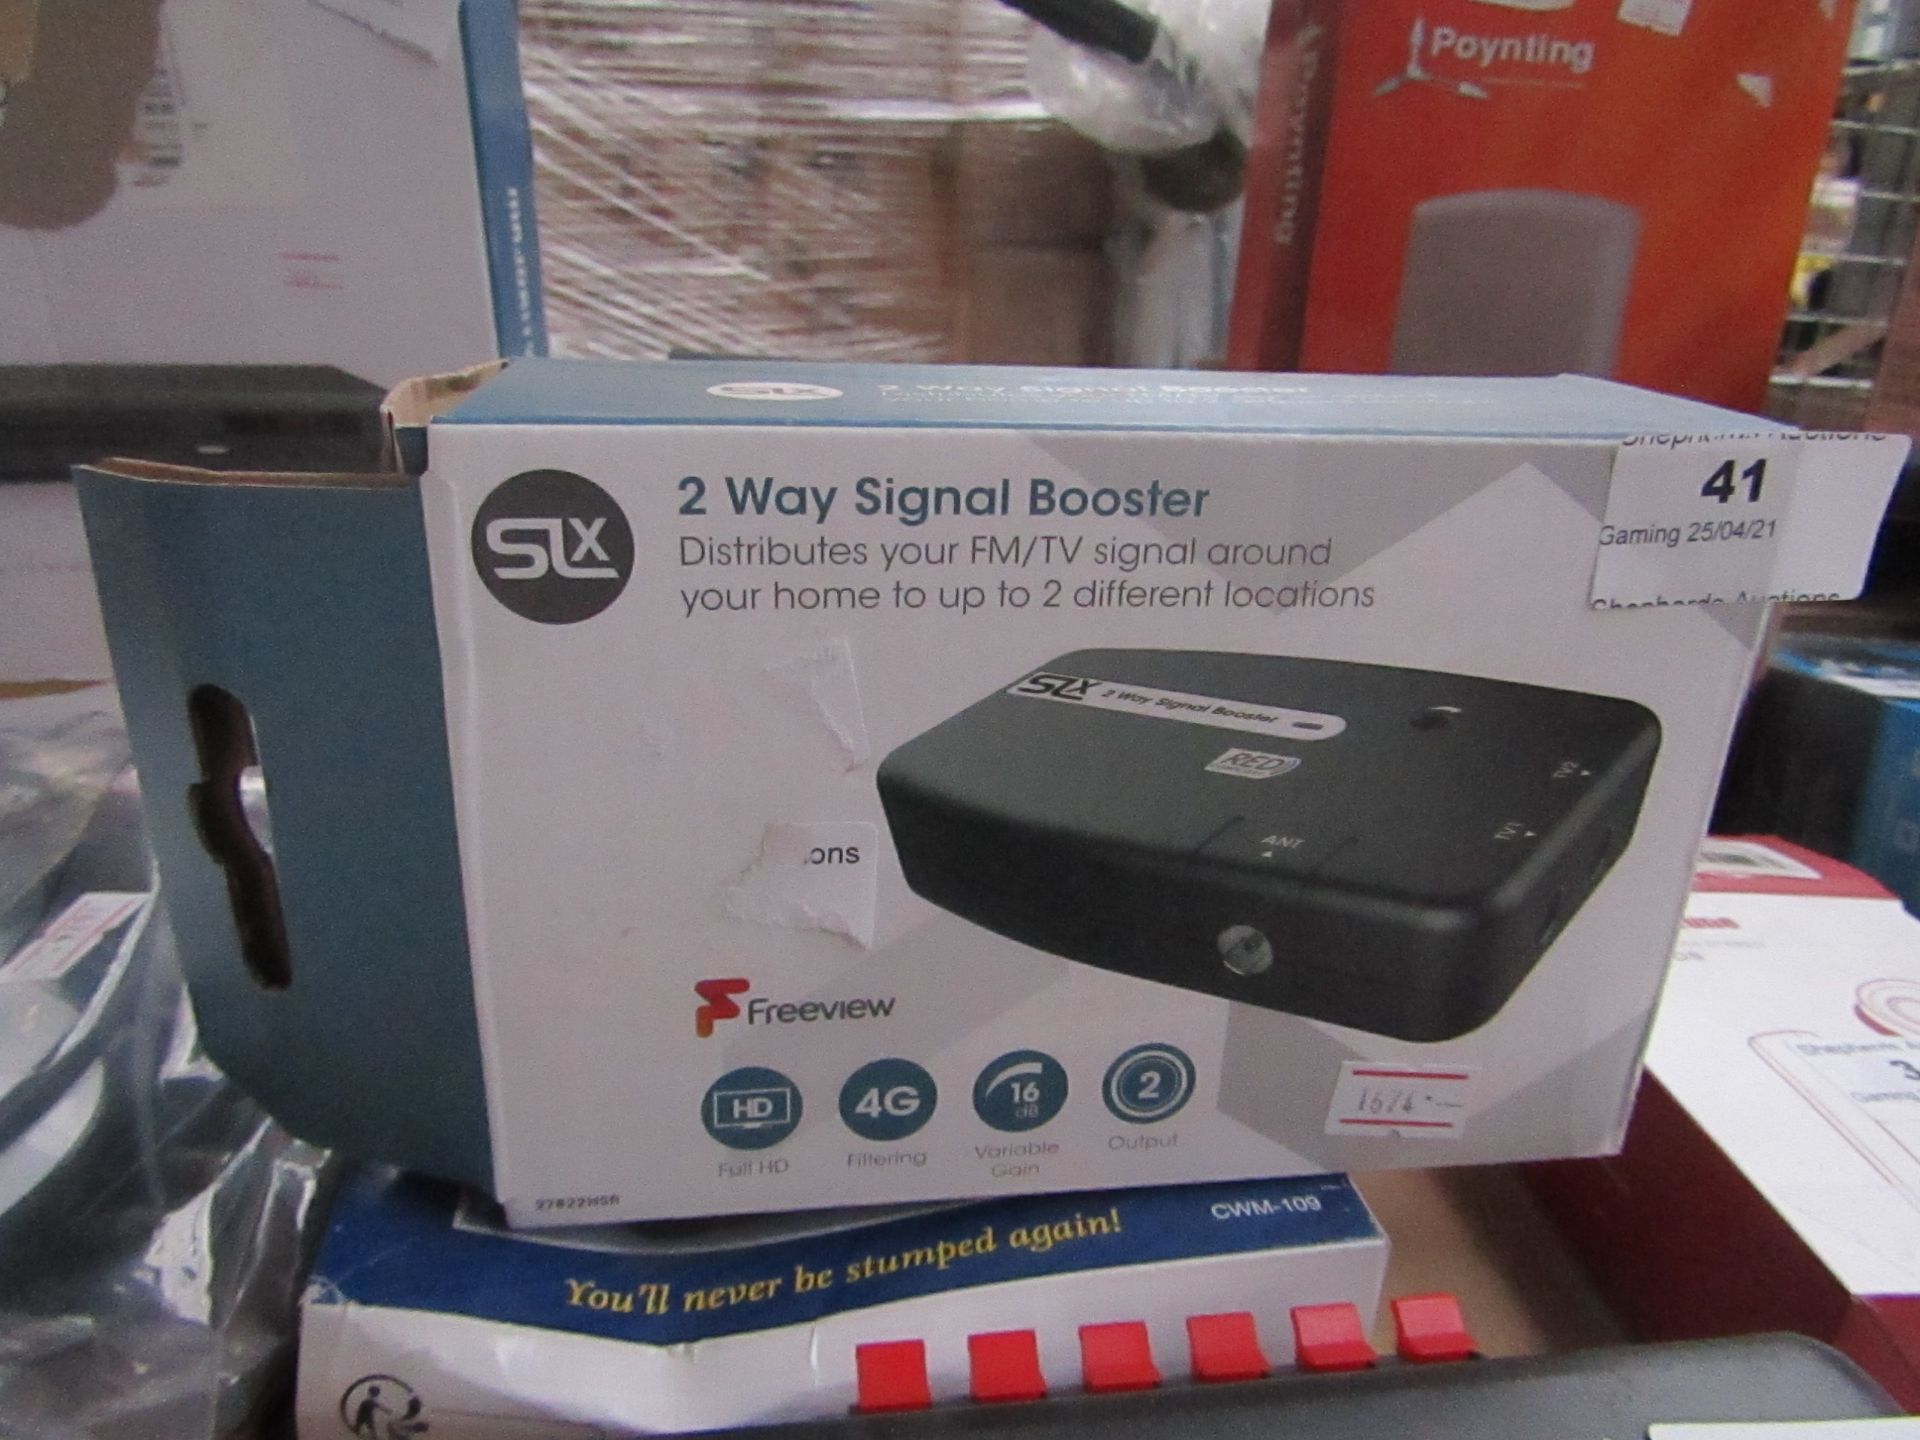 SLX 2 way signal booster, unchecked and boxed.